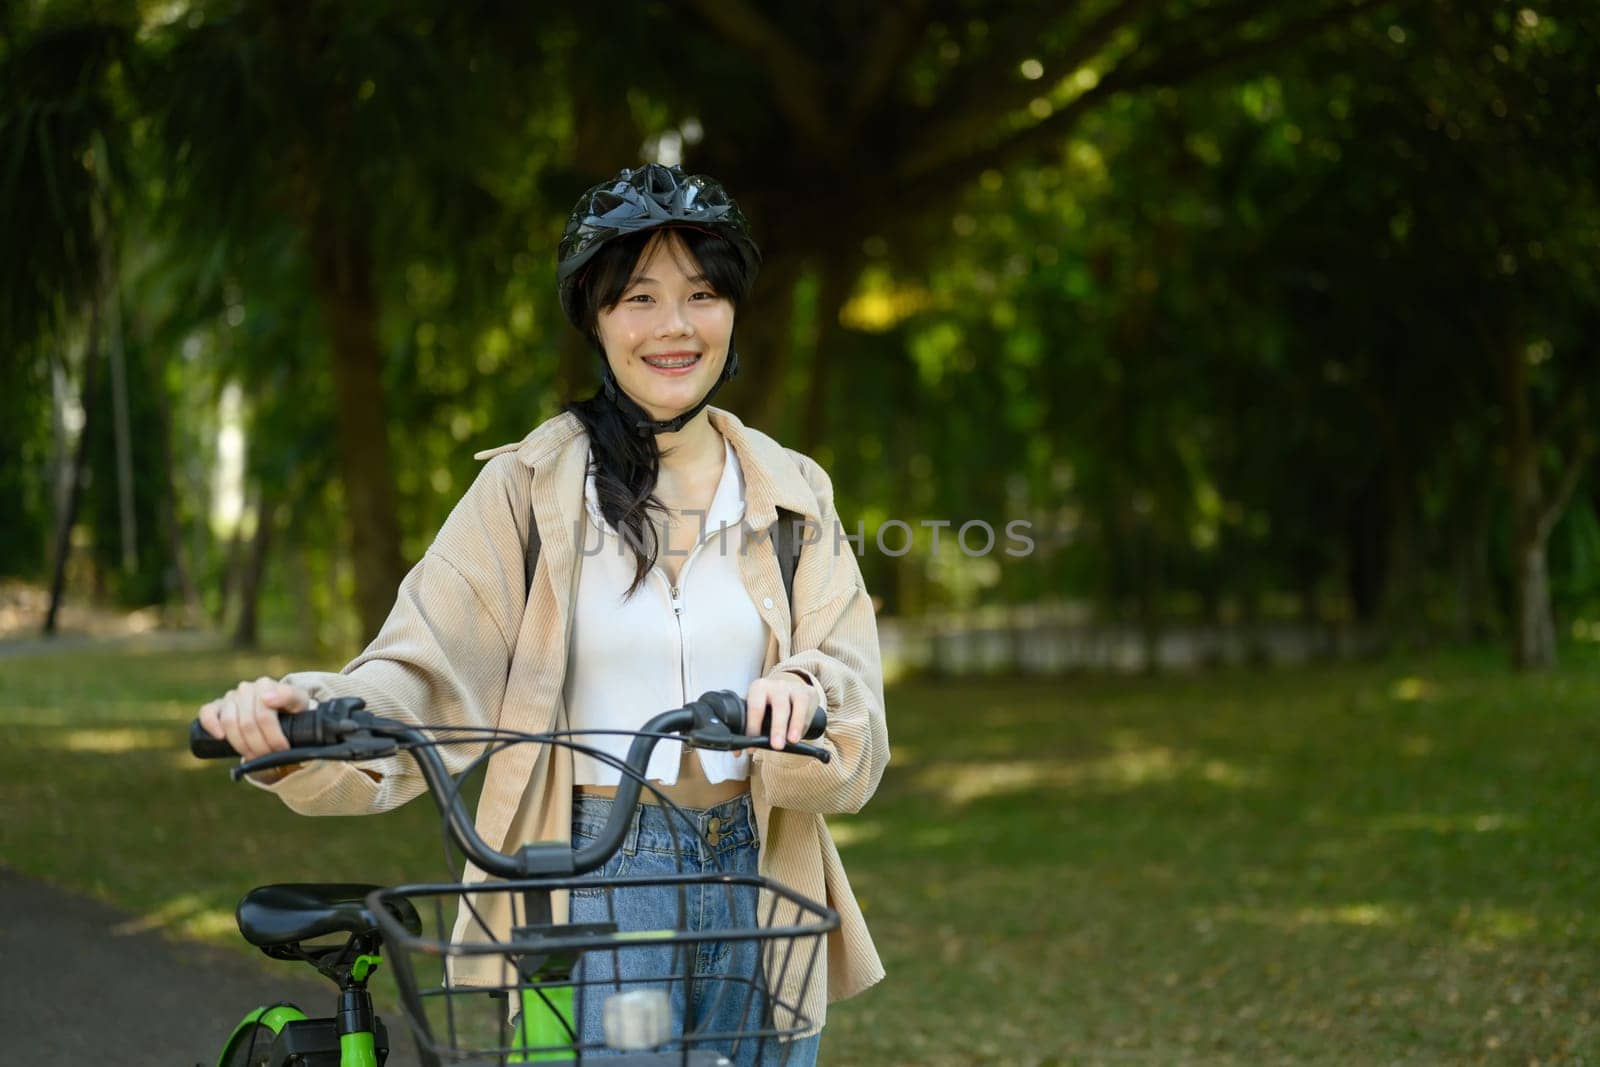 Smiling young woman in helmet walking with bicycle in city park on beautiful spring day by prathanchorruangsak